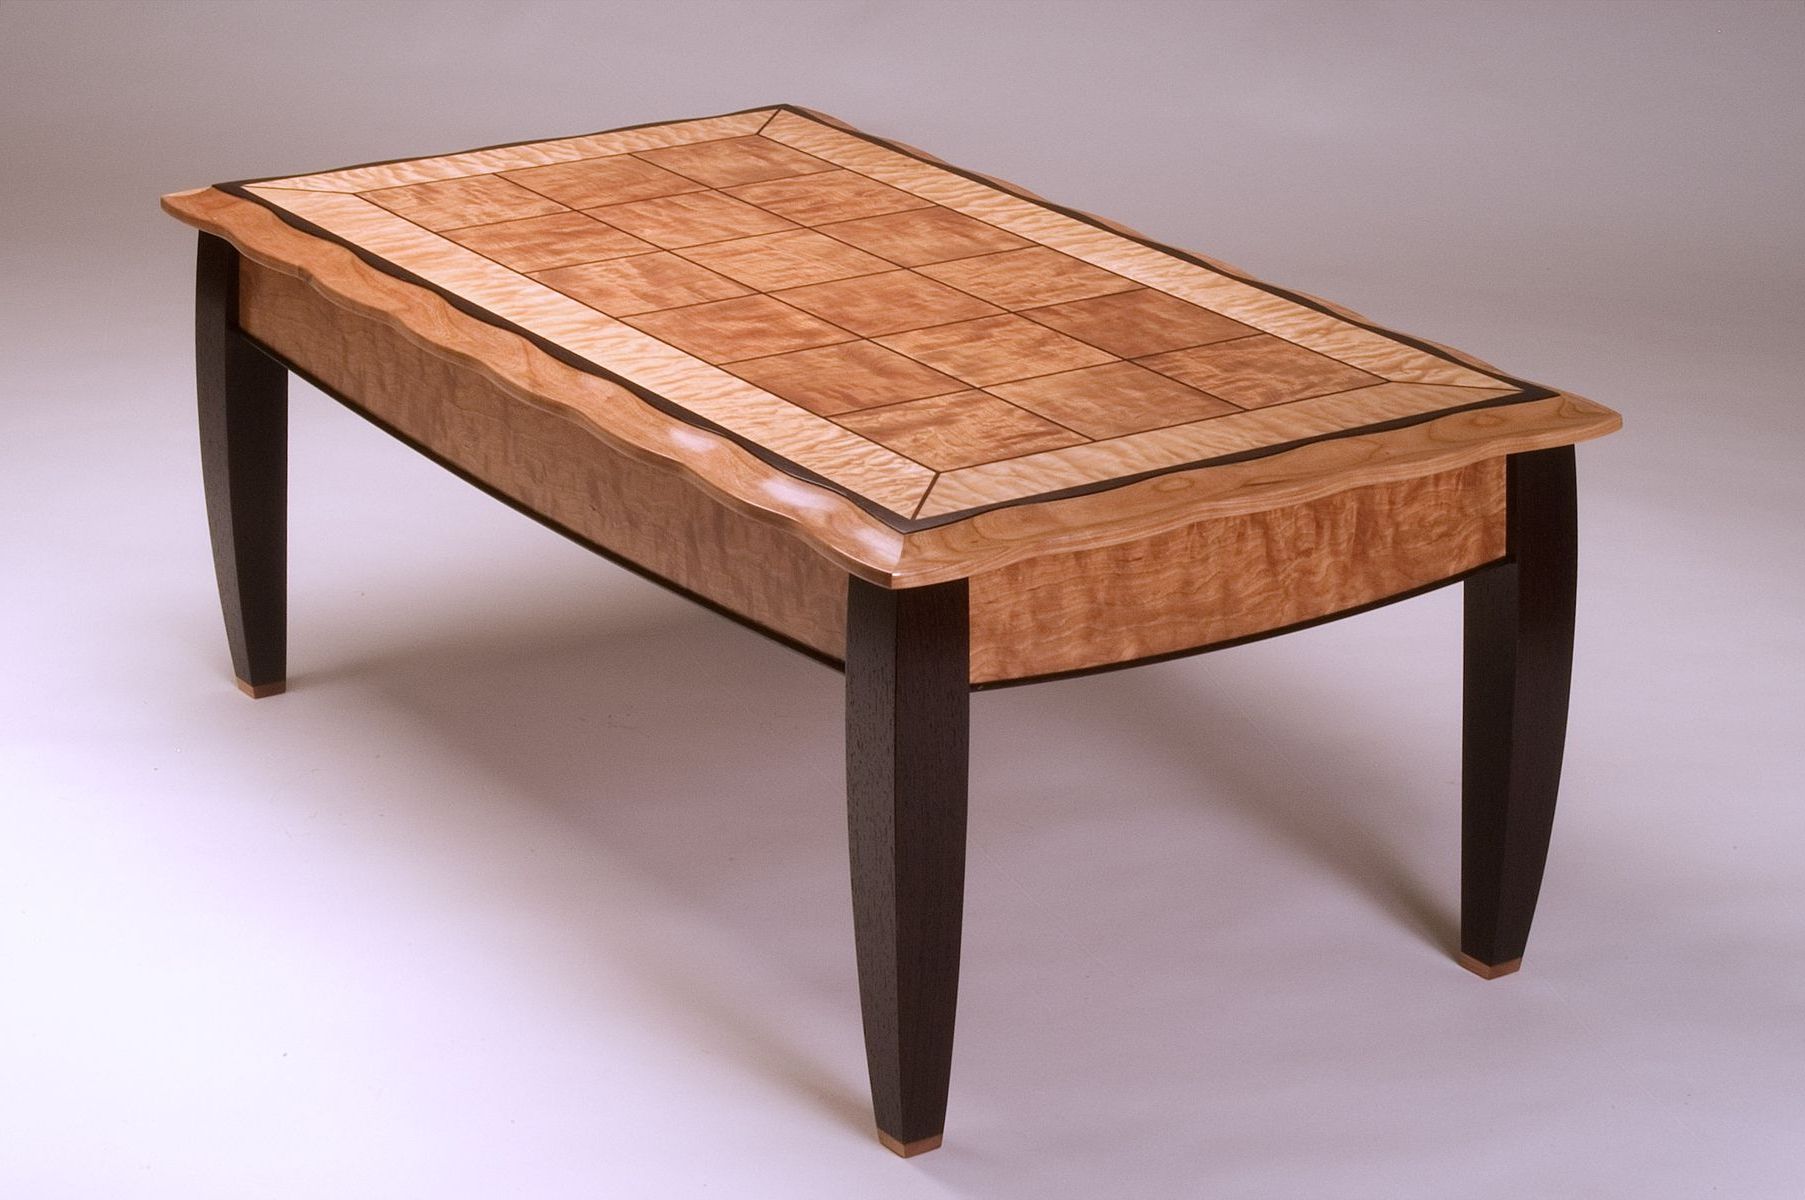 Most Popular Hand Made Figured Cherry Coffee Tableneal Barrett Woodworking Inside Heartwood Cherry Wood Coffee Tables (View 9 of 10)